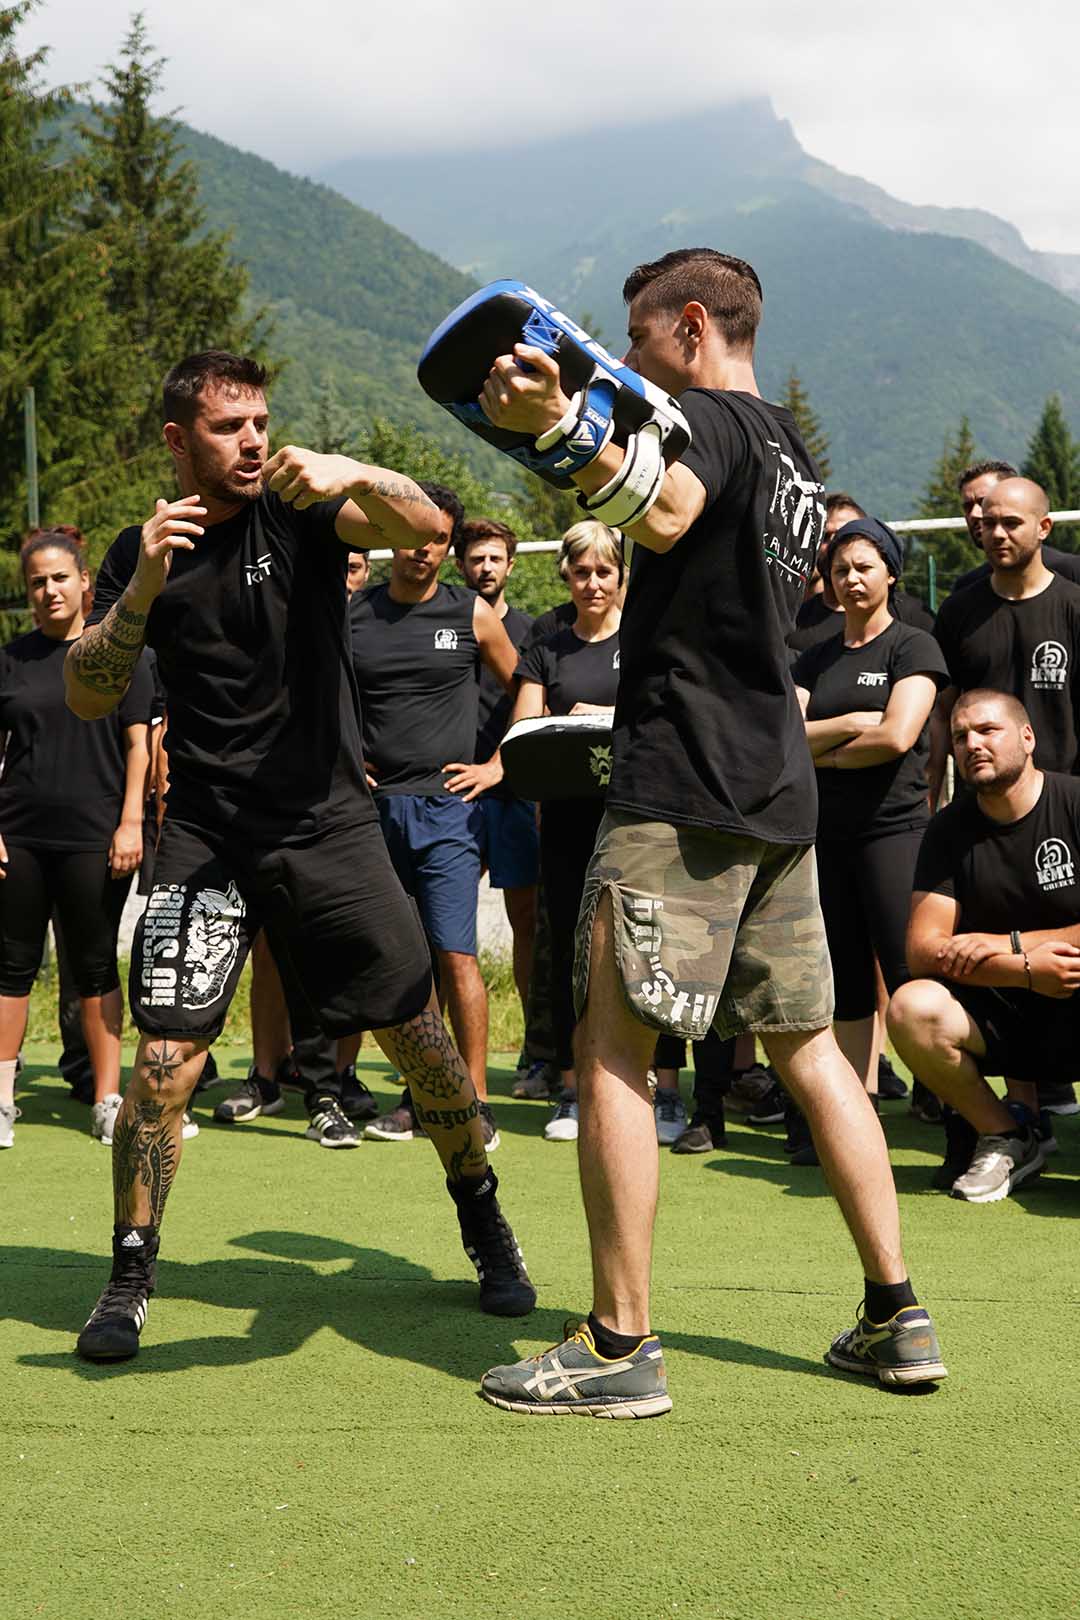 Krav Maga Training Summer Camp punch techniques with padman